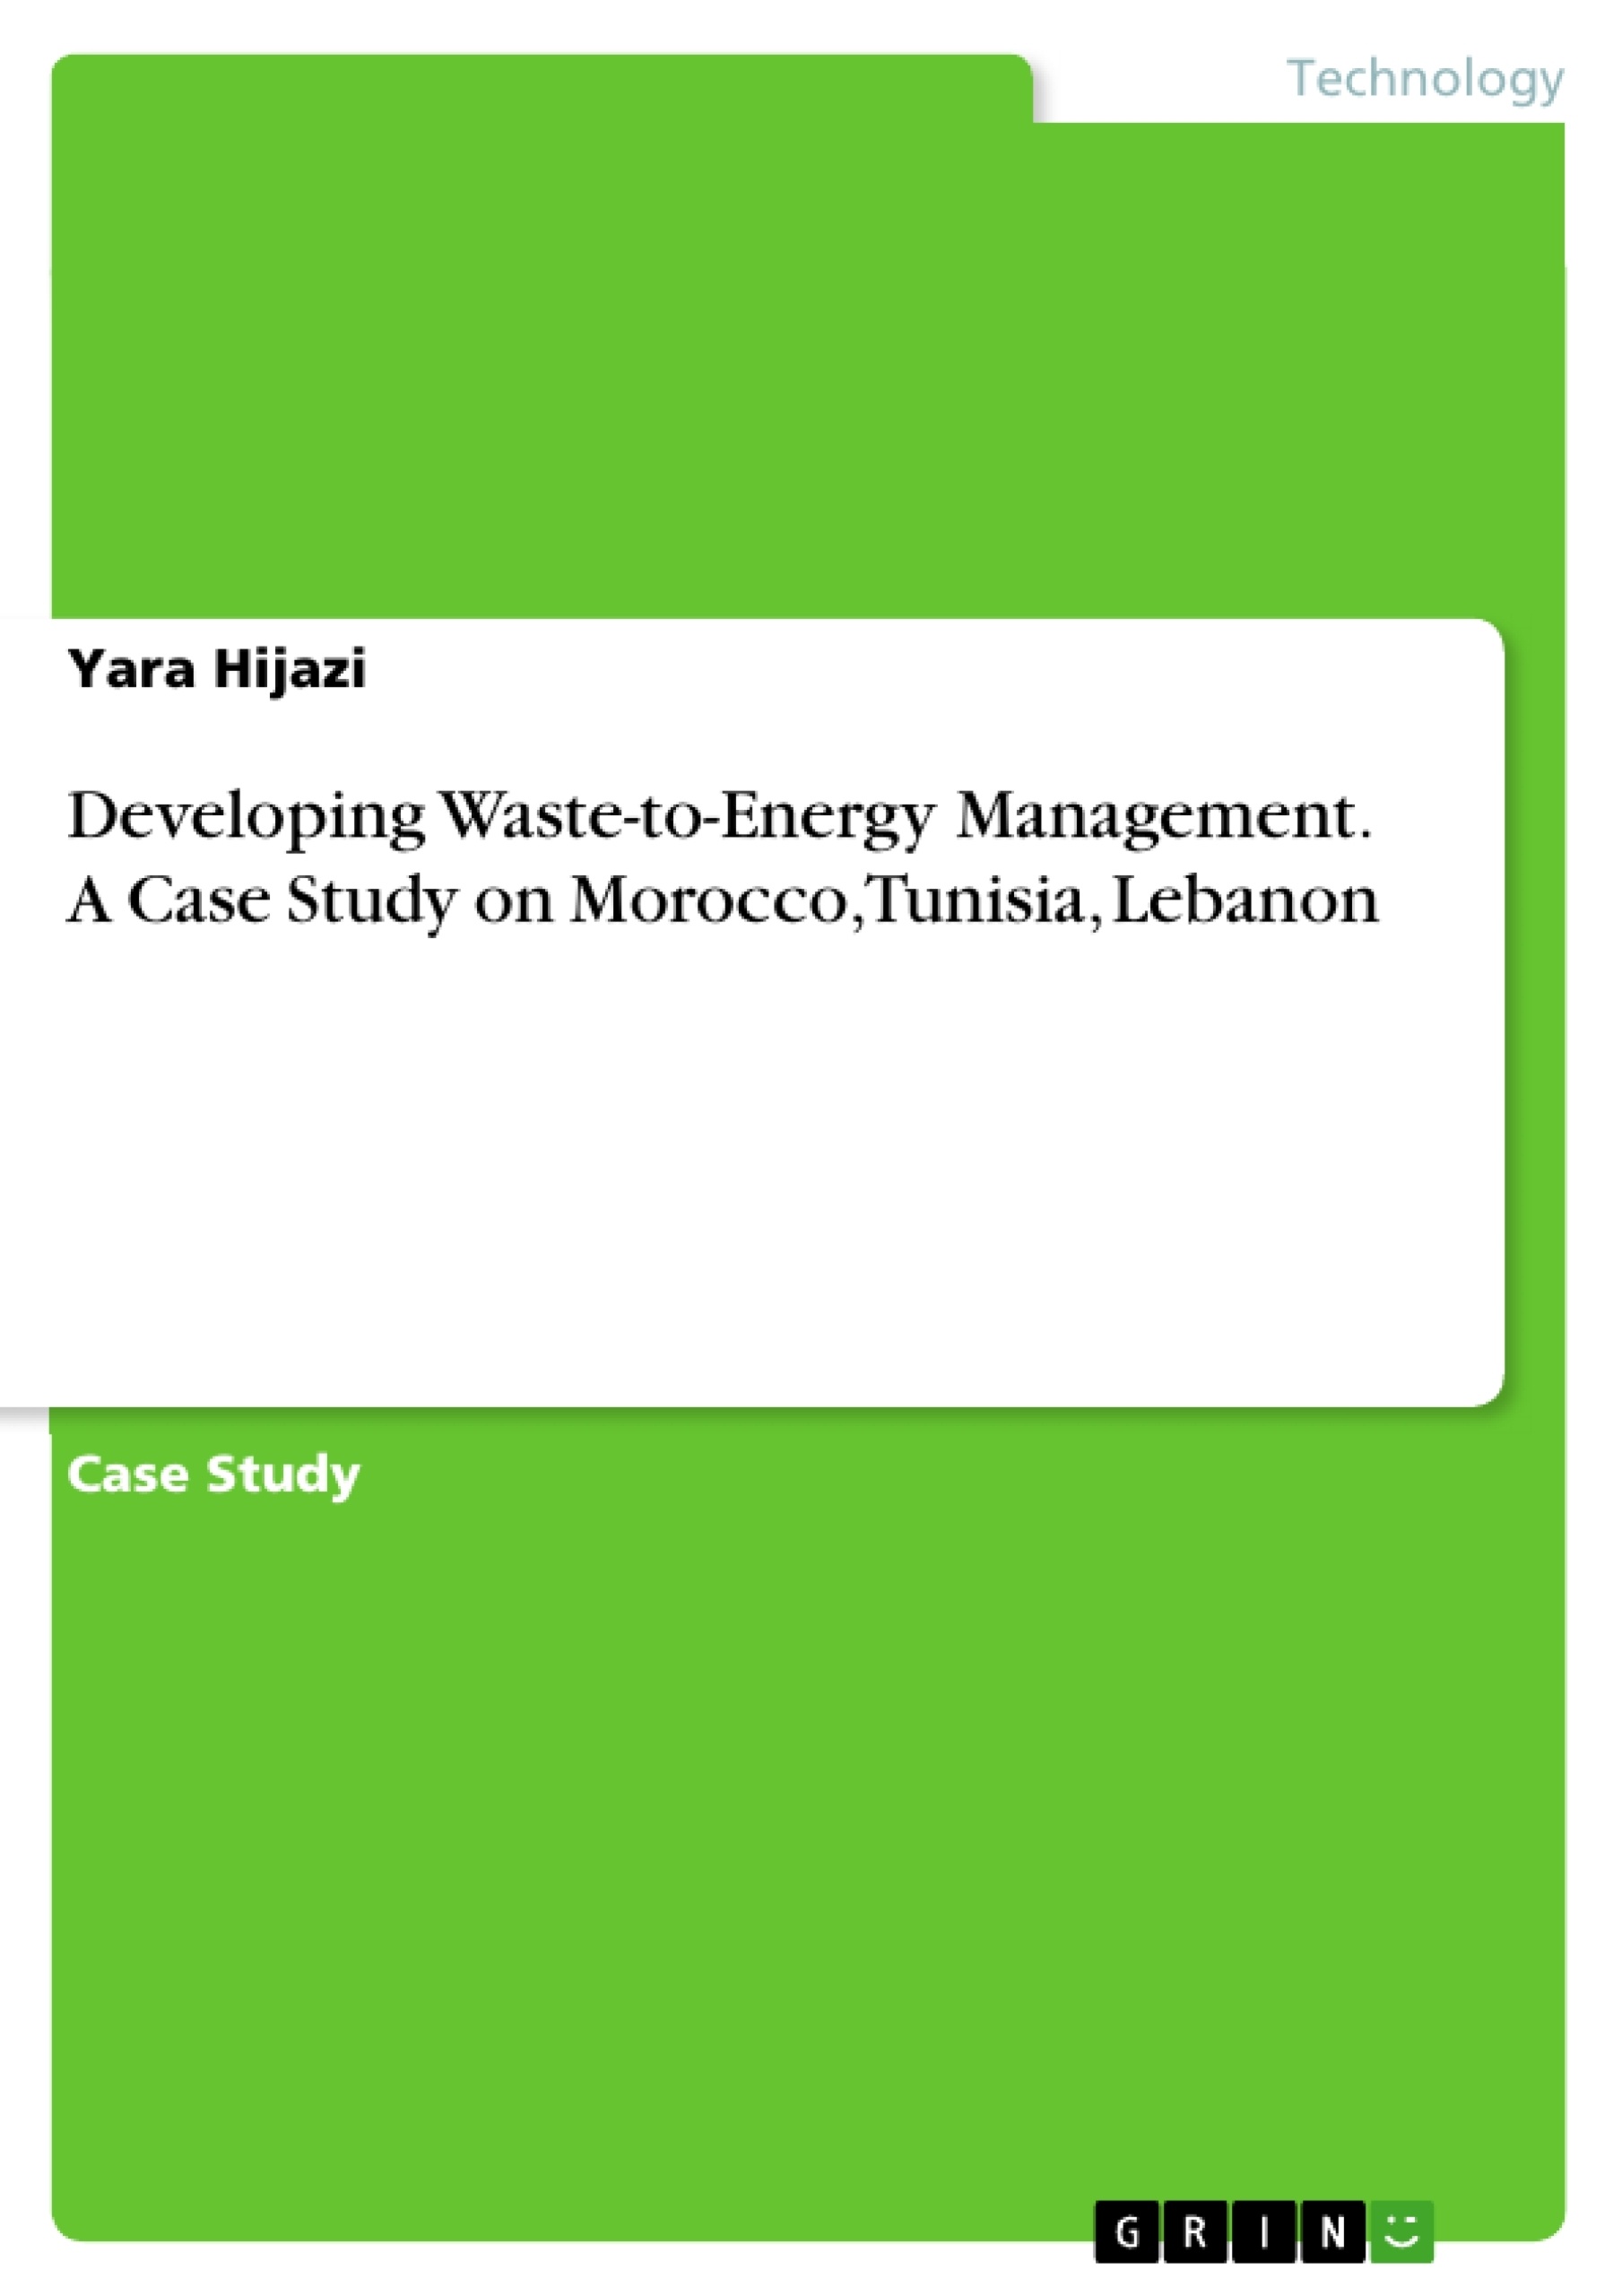 Title: Developing Waste-to-Energy Management. A Case Study on Morocco, Tunisia, Lebanon